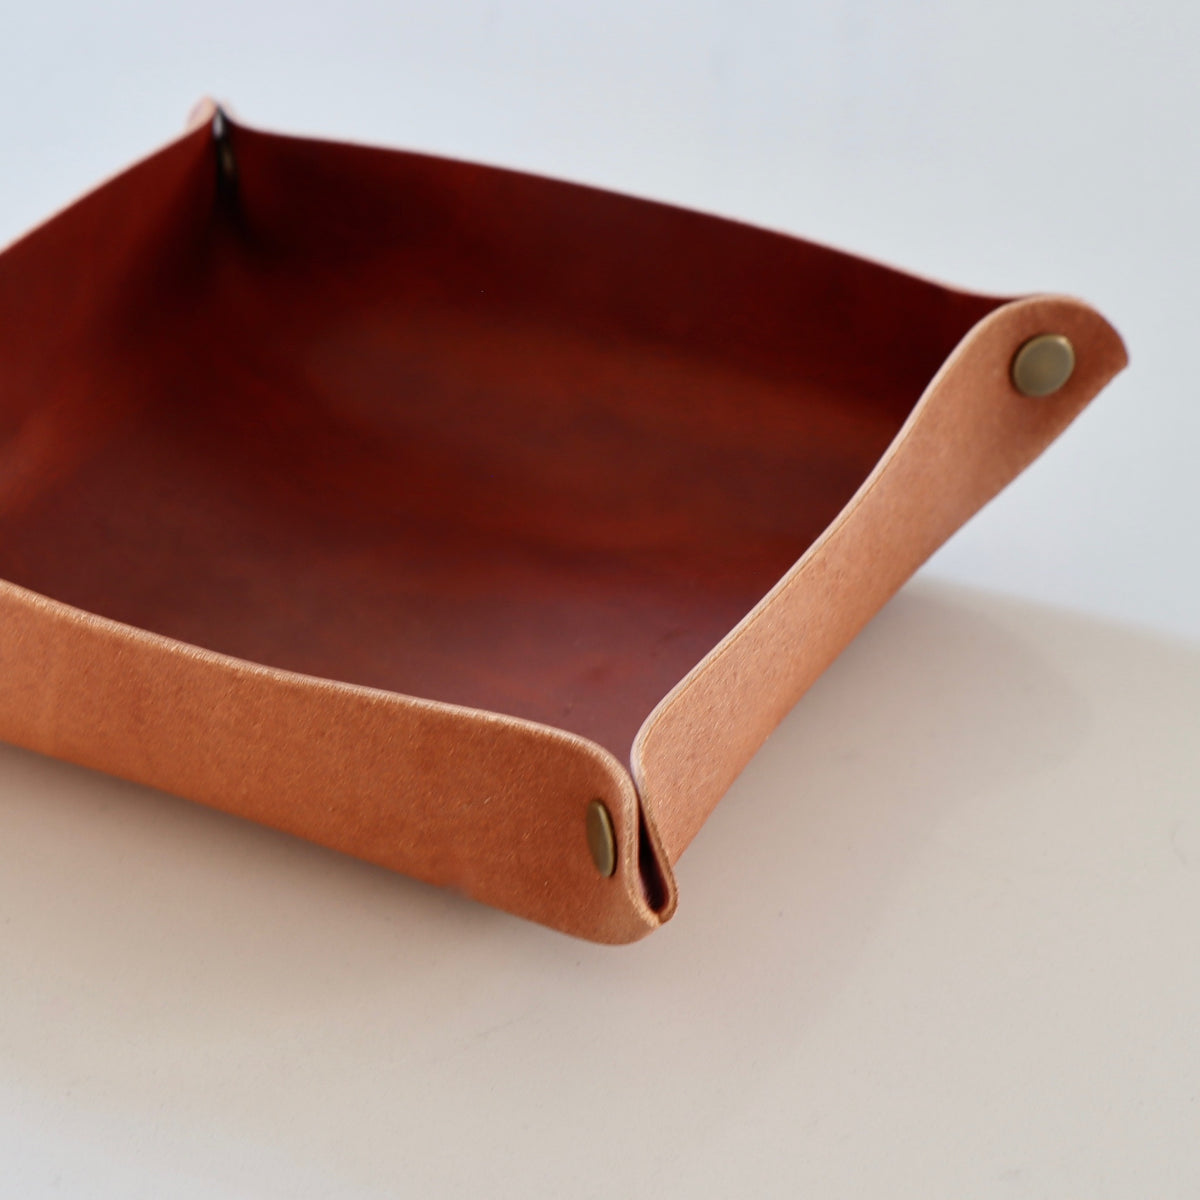 Leather Valet Tray in Horween English Tan - Holistic Habitat 